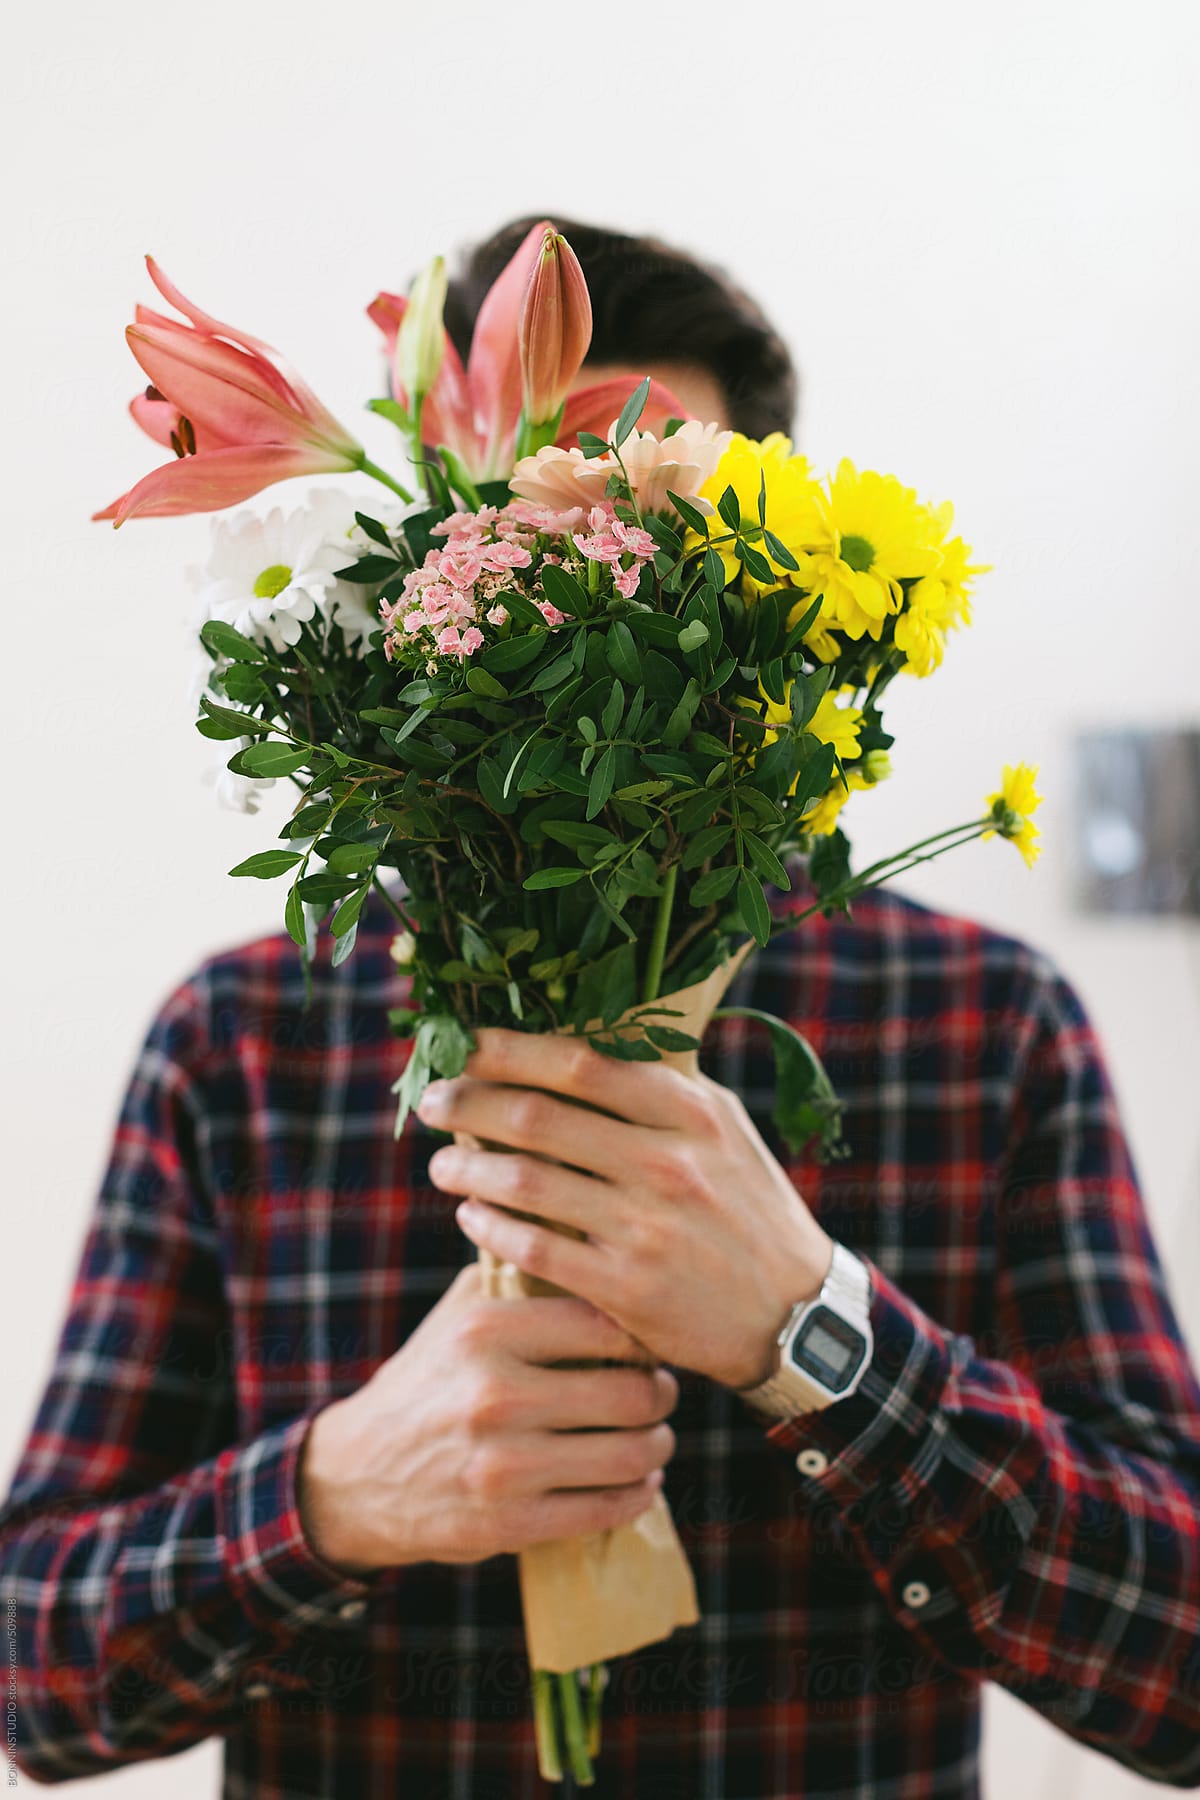 Young man covering his face with a bouquet of flowers.